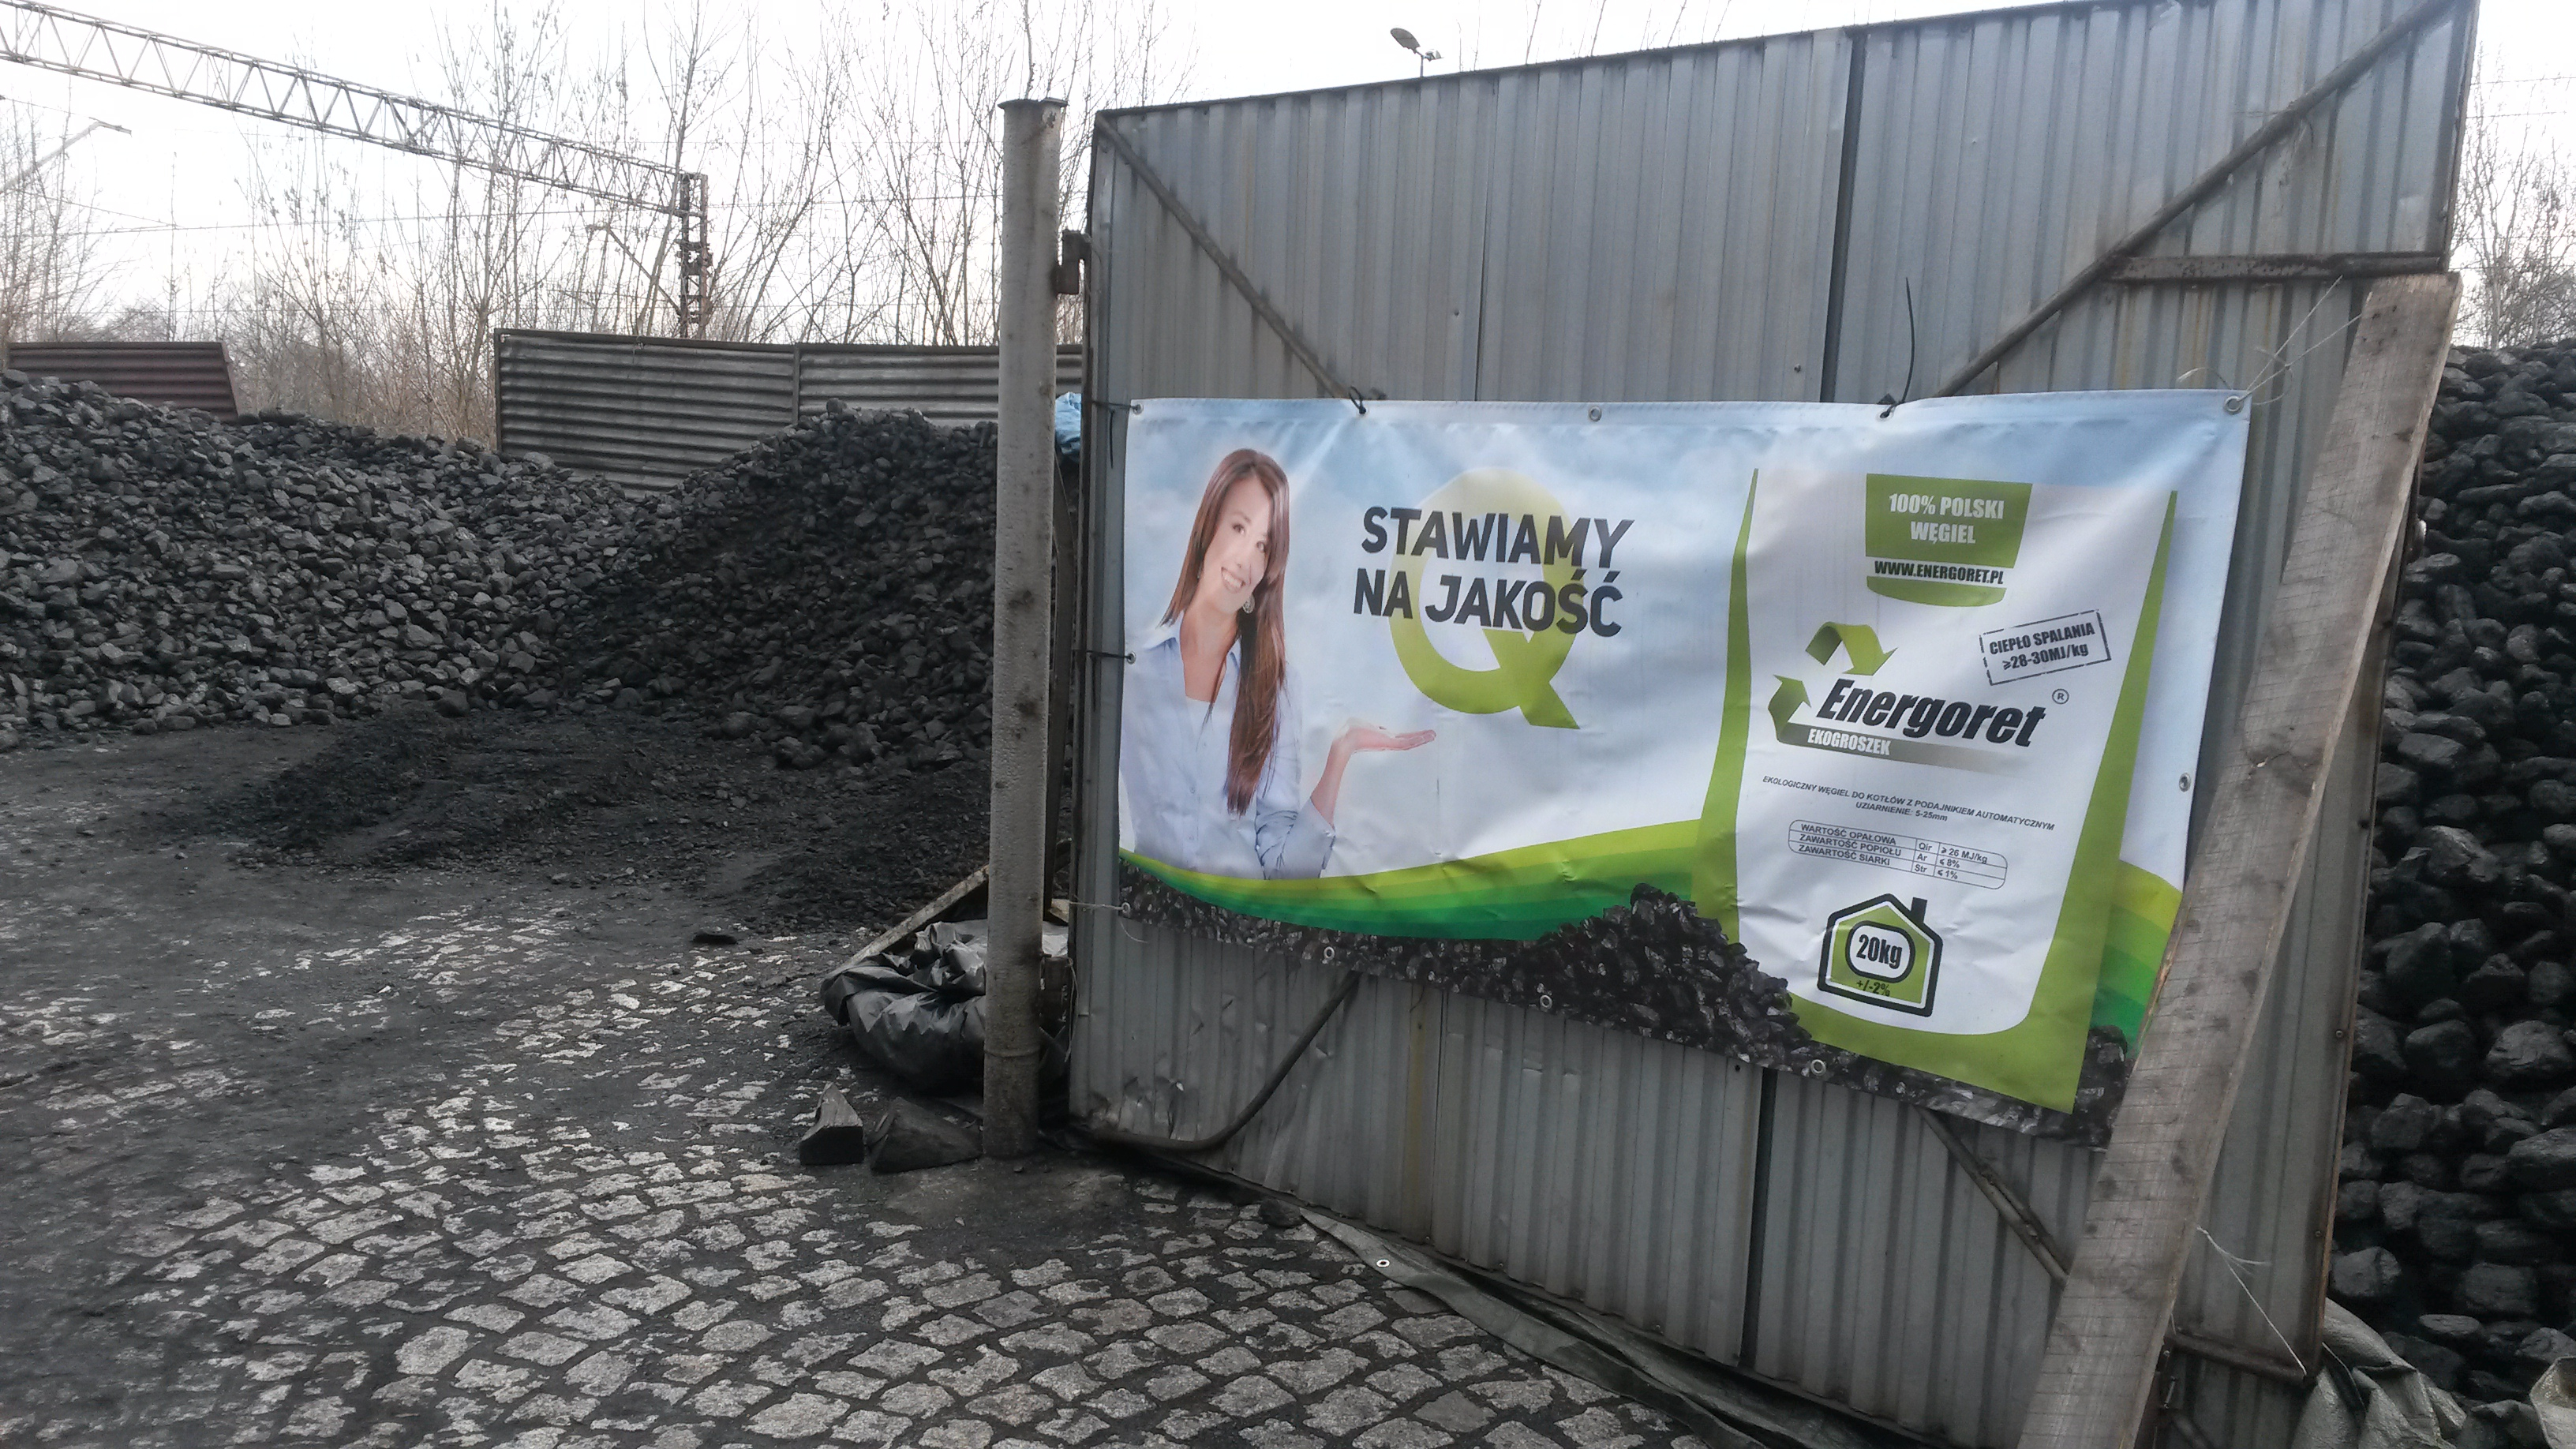 “Quality is our priority,” says the banner at Grzegorz Rumin’s coal lot. Krakow residents breathe the worst air in Poland, in part because some burn coal all winter in low-tech home stoves. Image by Beth Gardiner. Poland, 2014.